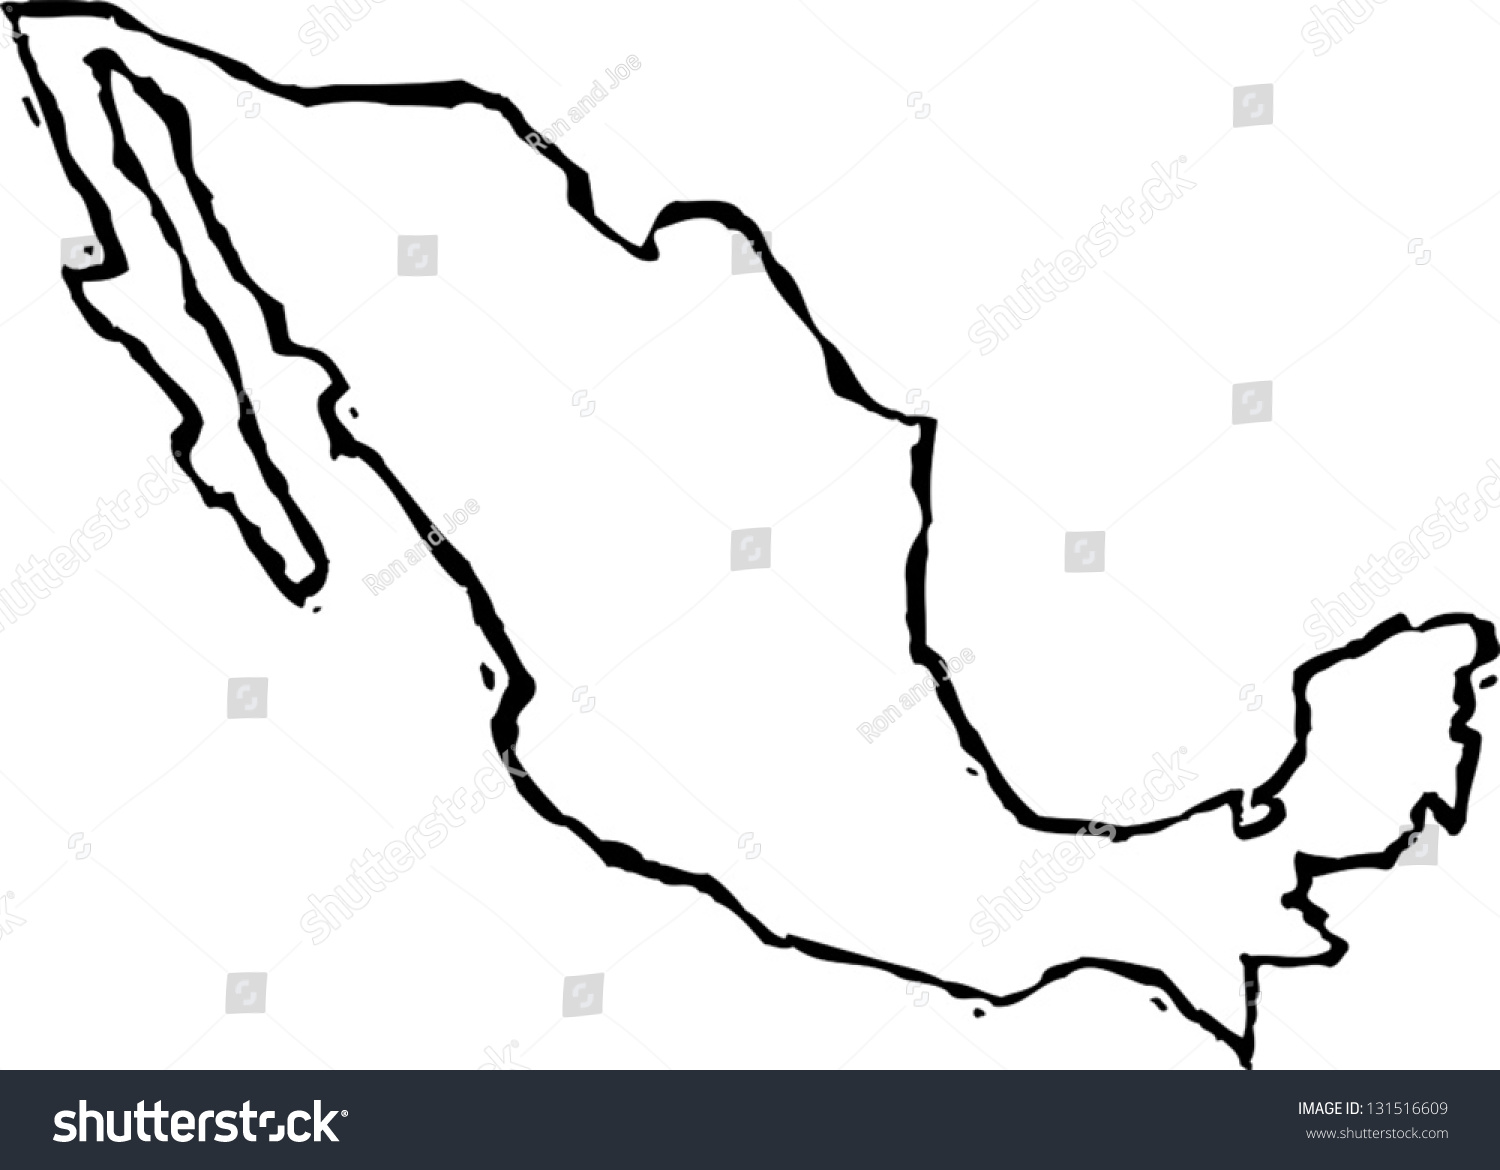 clipart map of mexico - photo #49